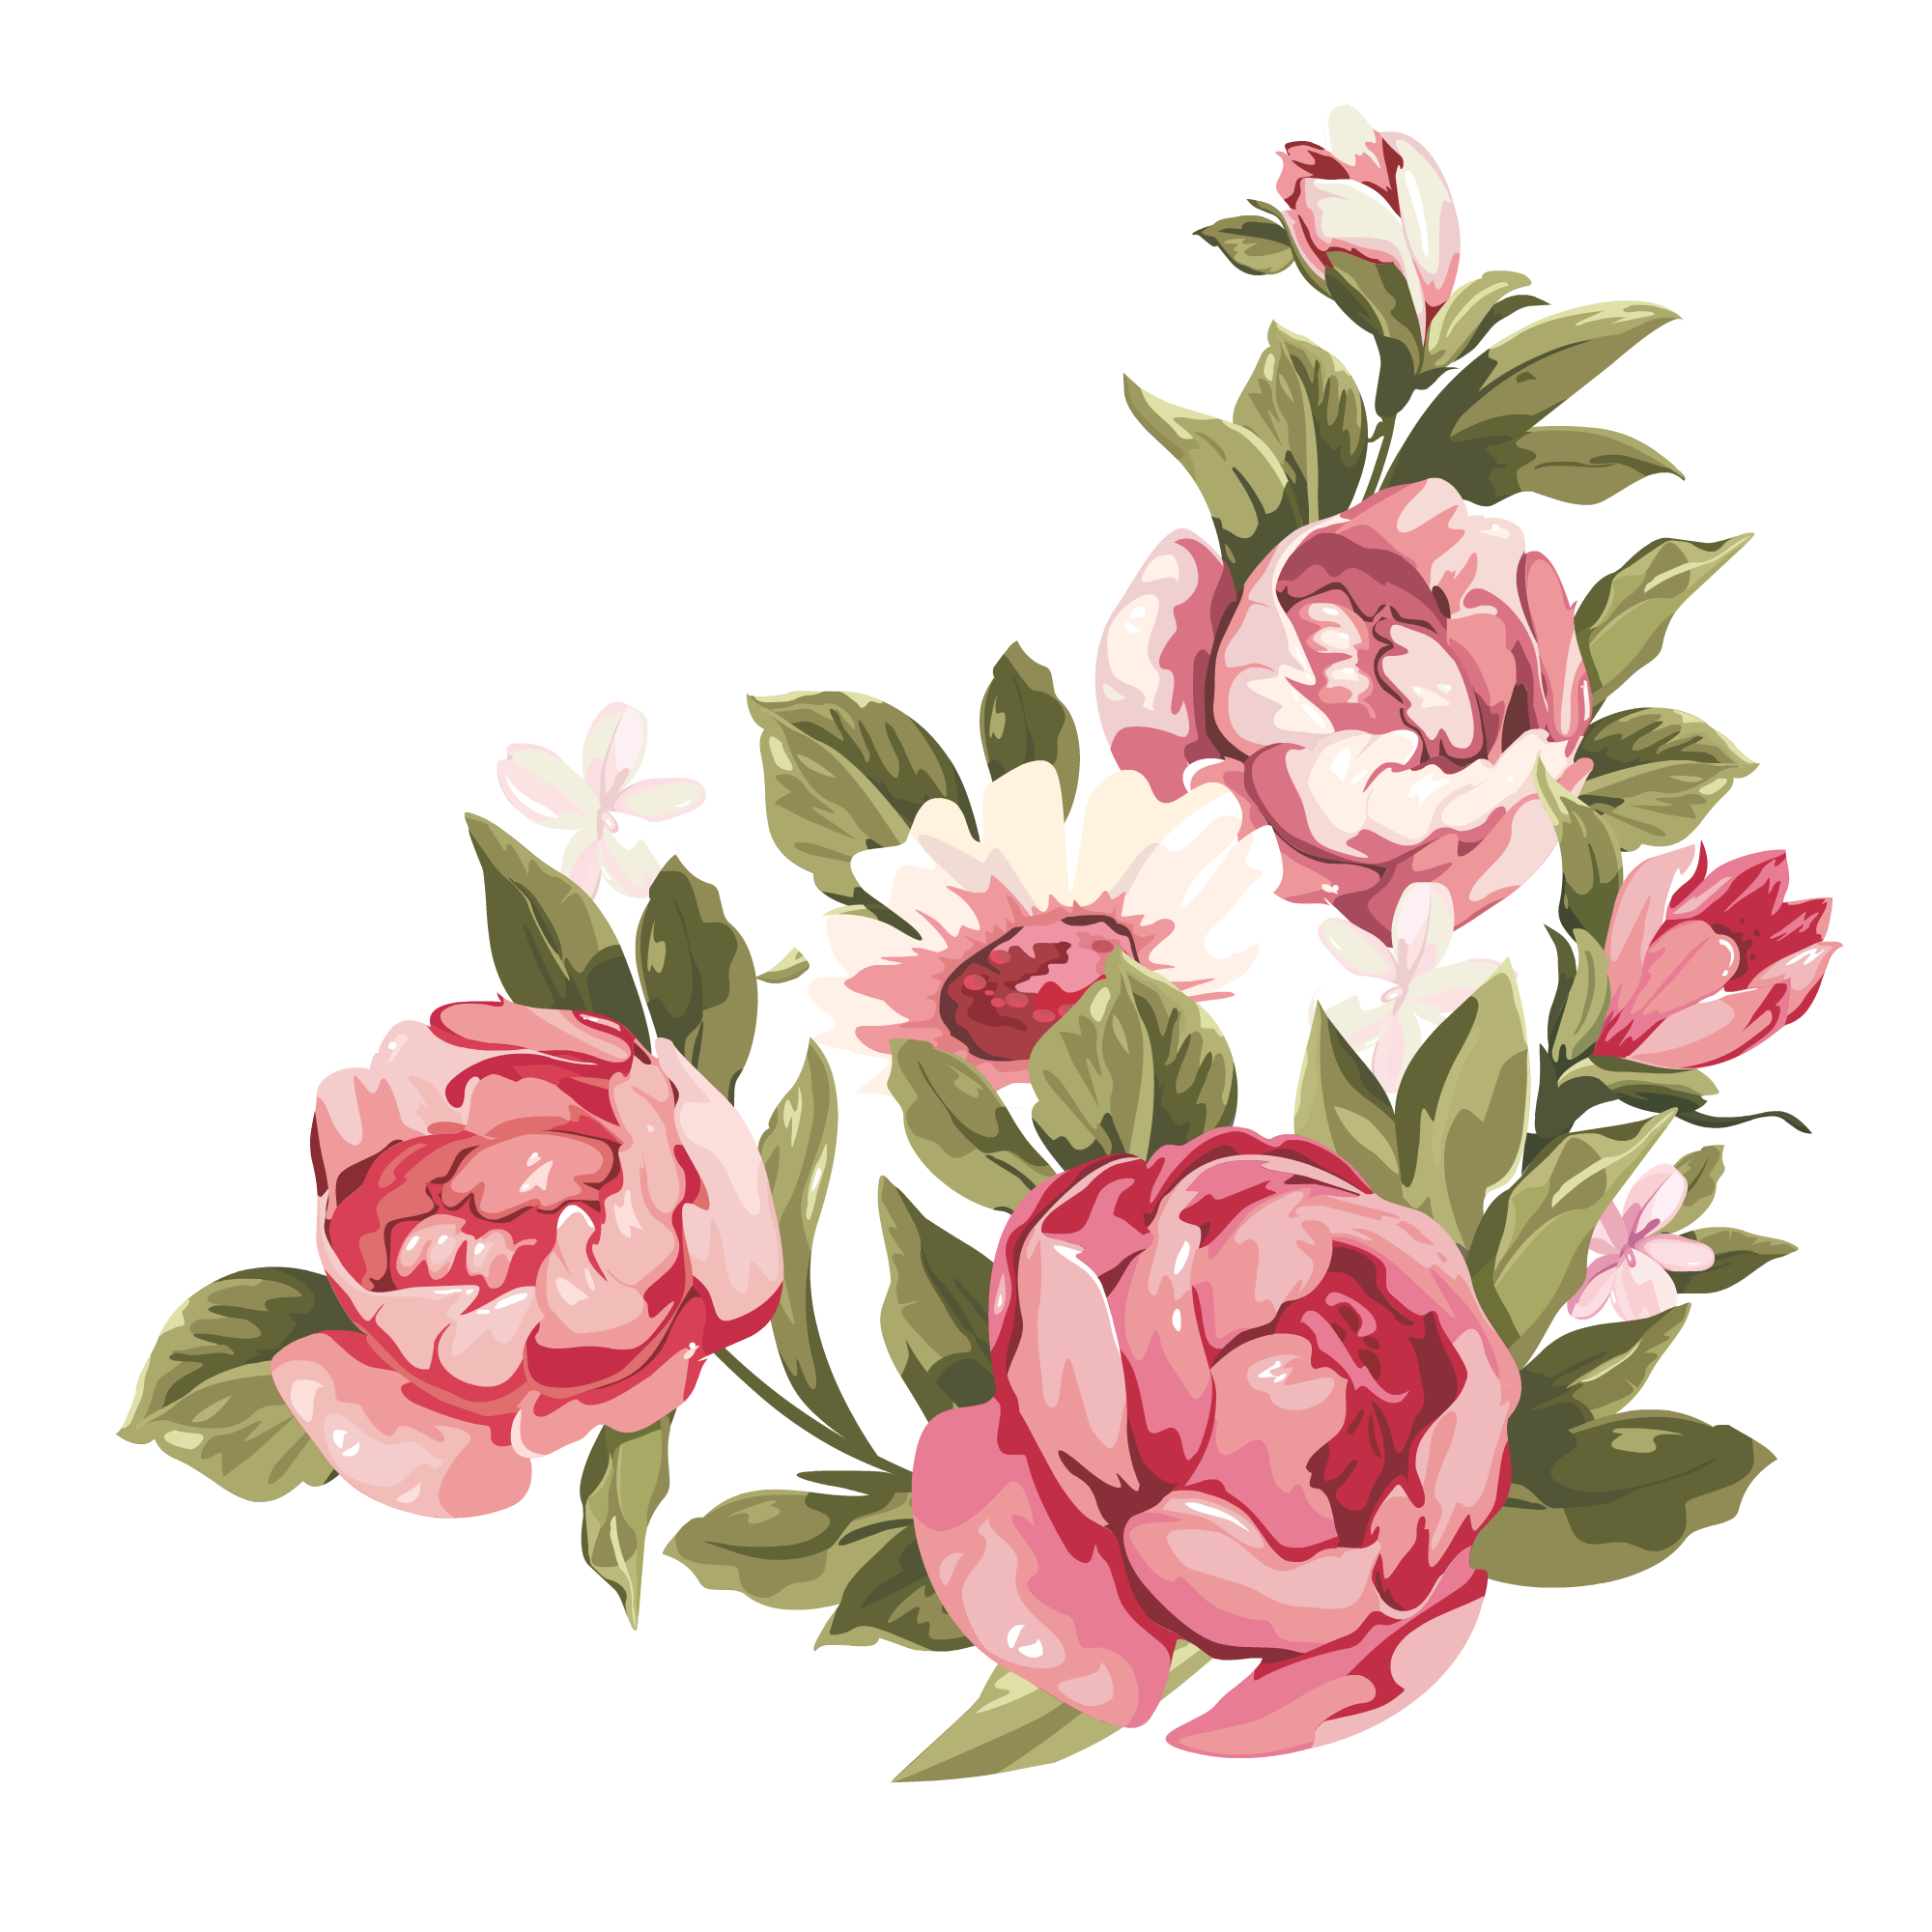 Download PNG image - Romantic Pink Flower Border PNG Clipart 